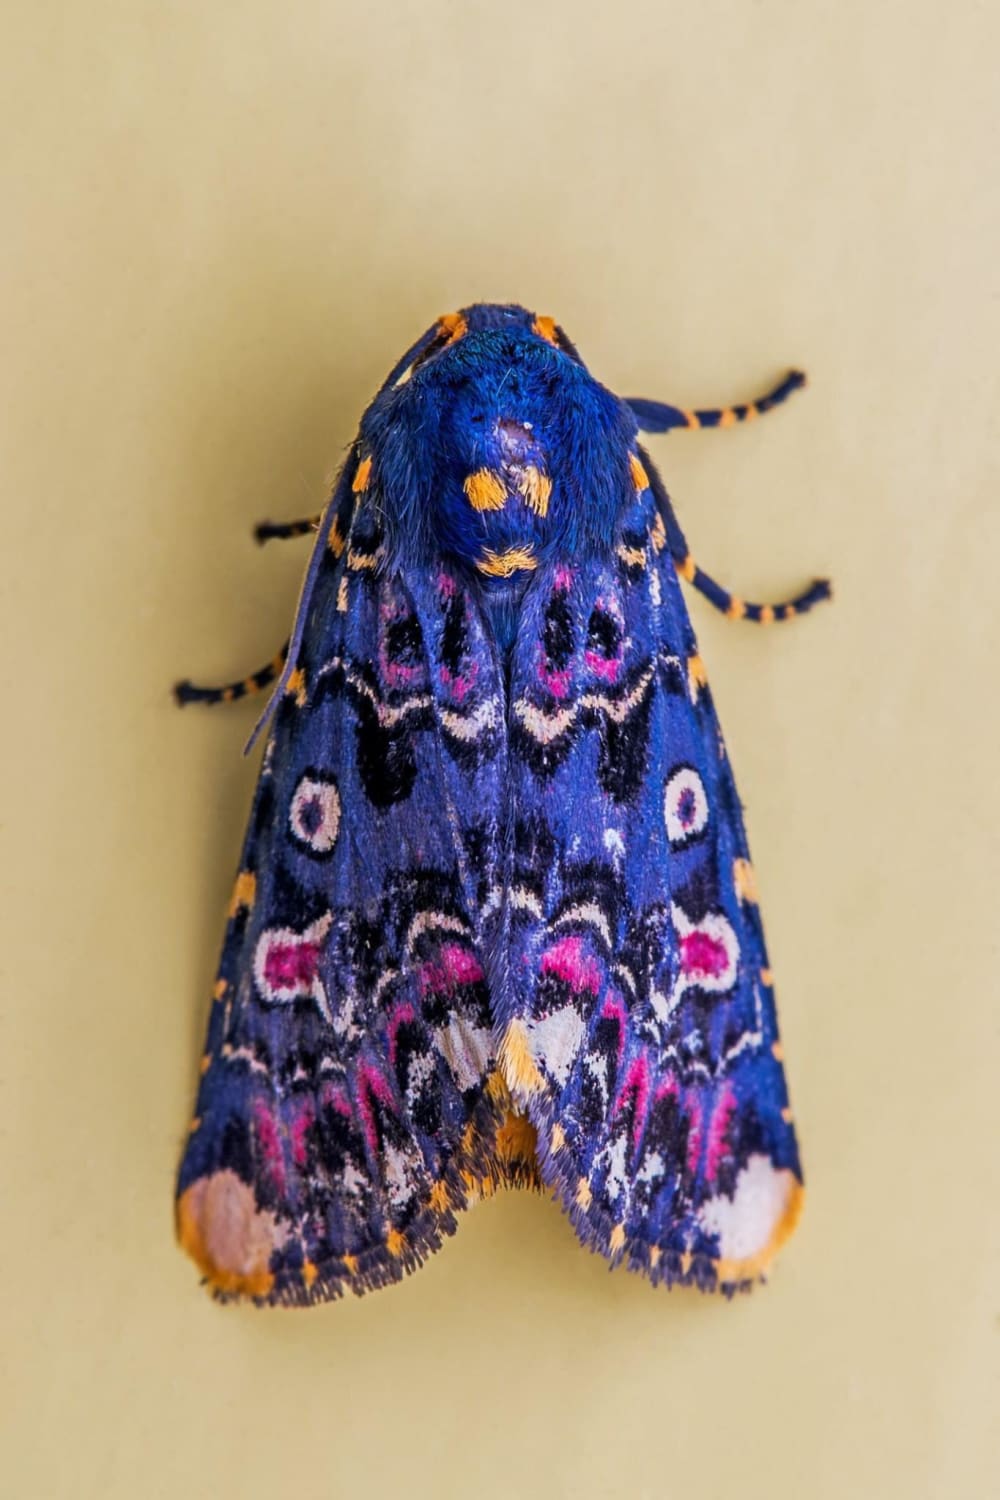 This Lily moth / Polytela gloriosae is a carnival of colors, by Arinadam S